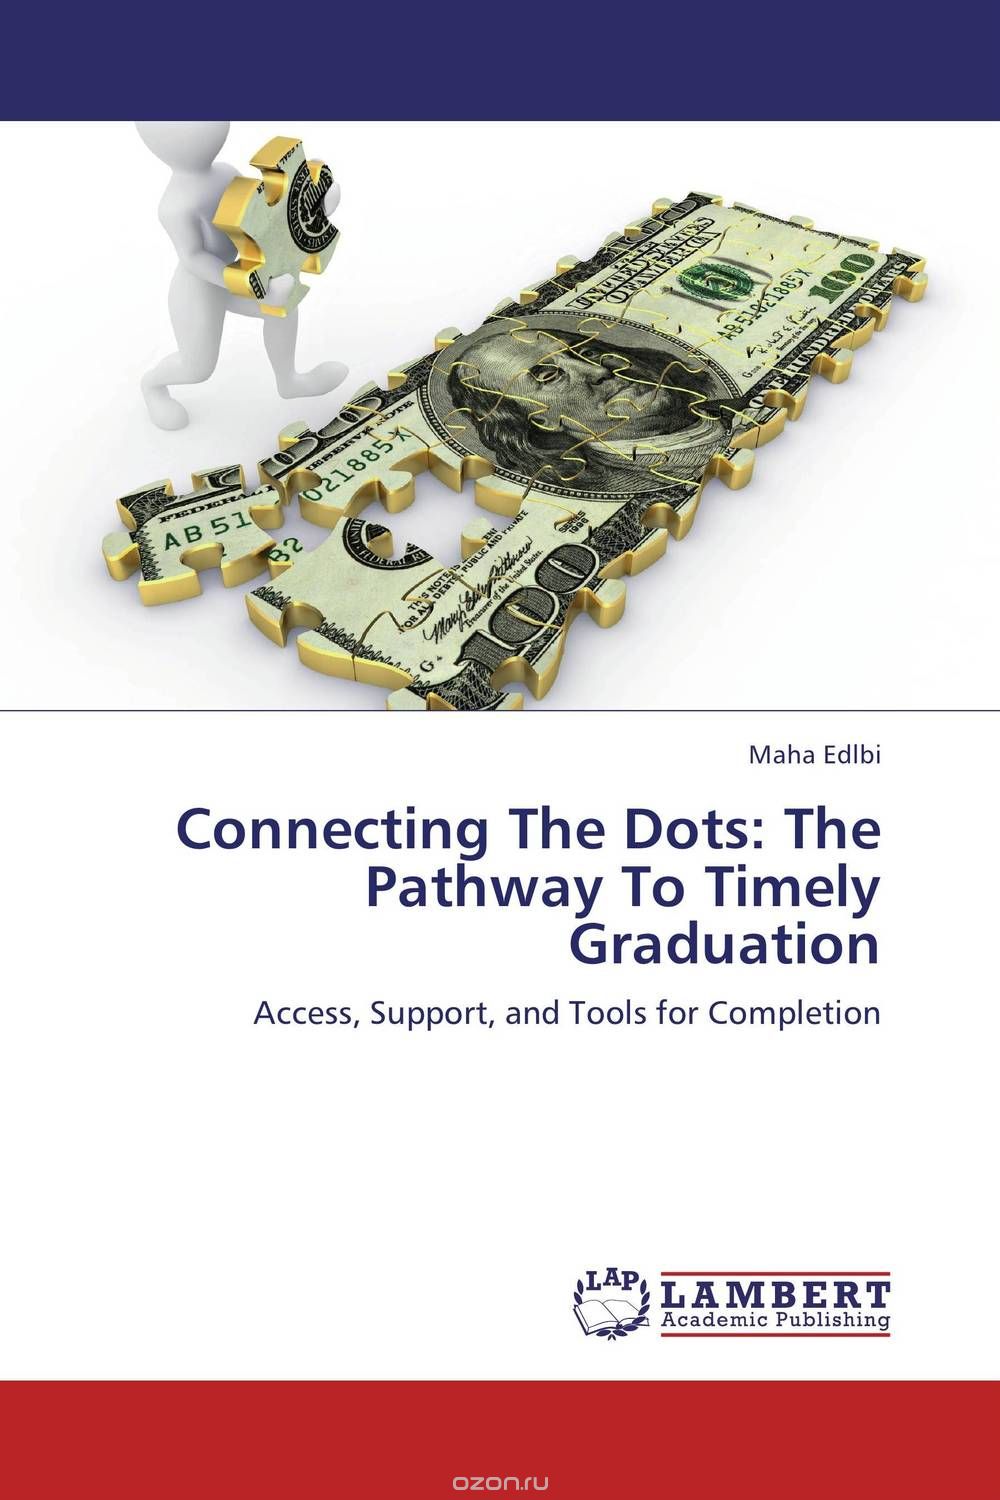 Скачать книгу "Connecting The Dots: The Pathway To Timely Graduation"